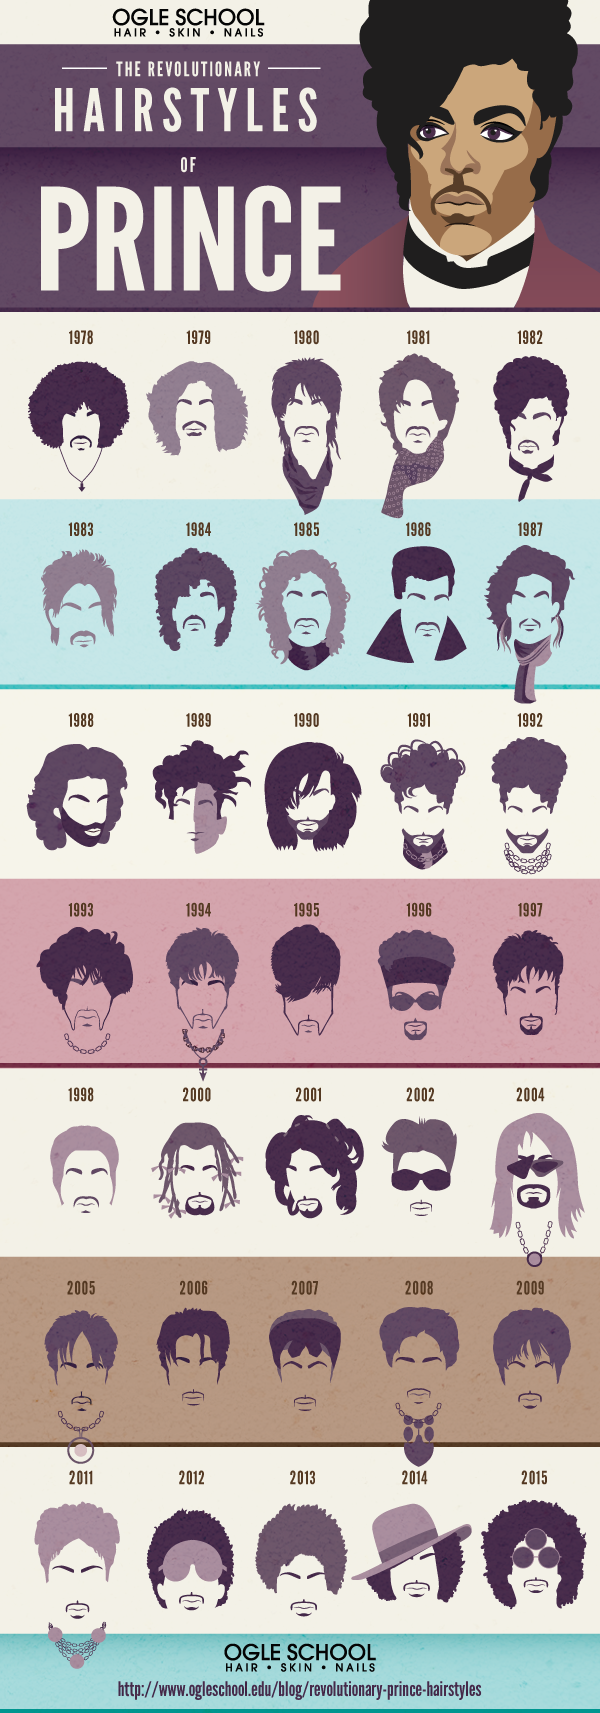 The Revolutionary Hairstyles of Prince